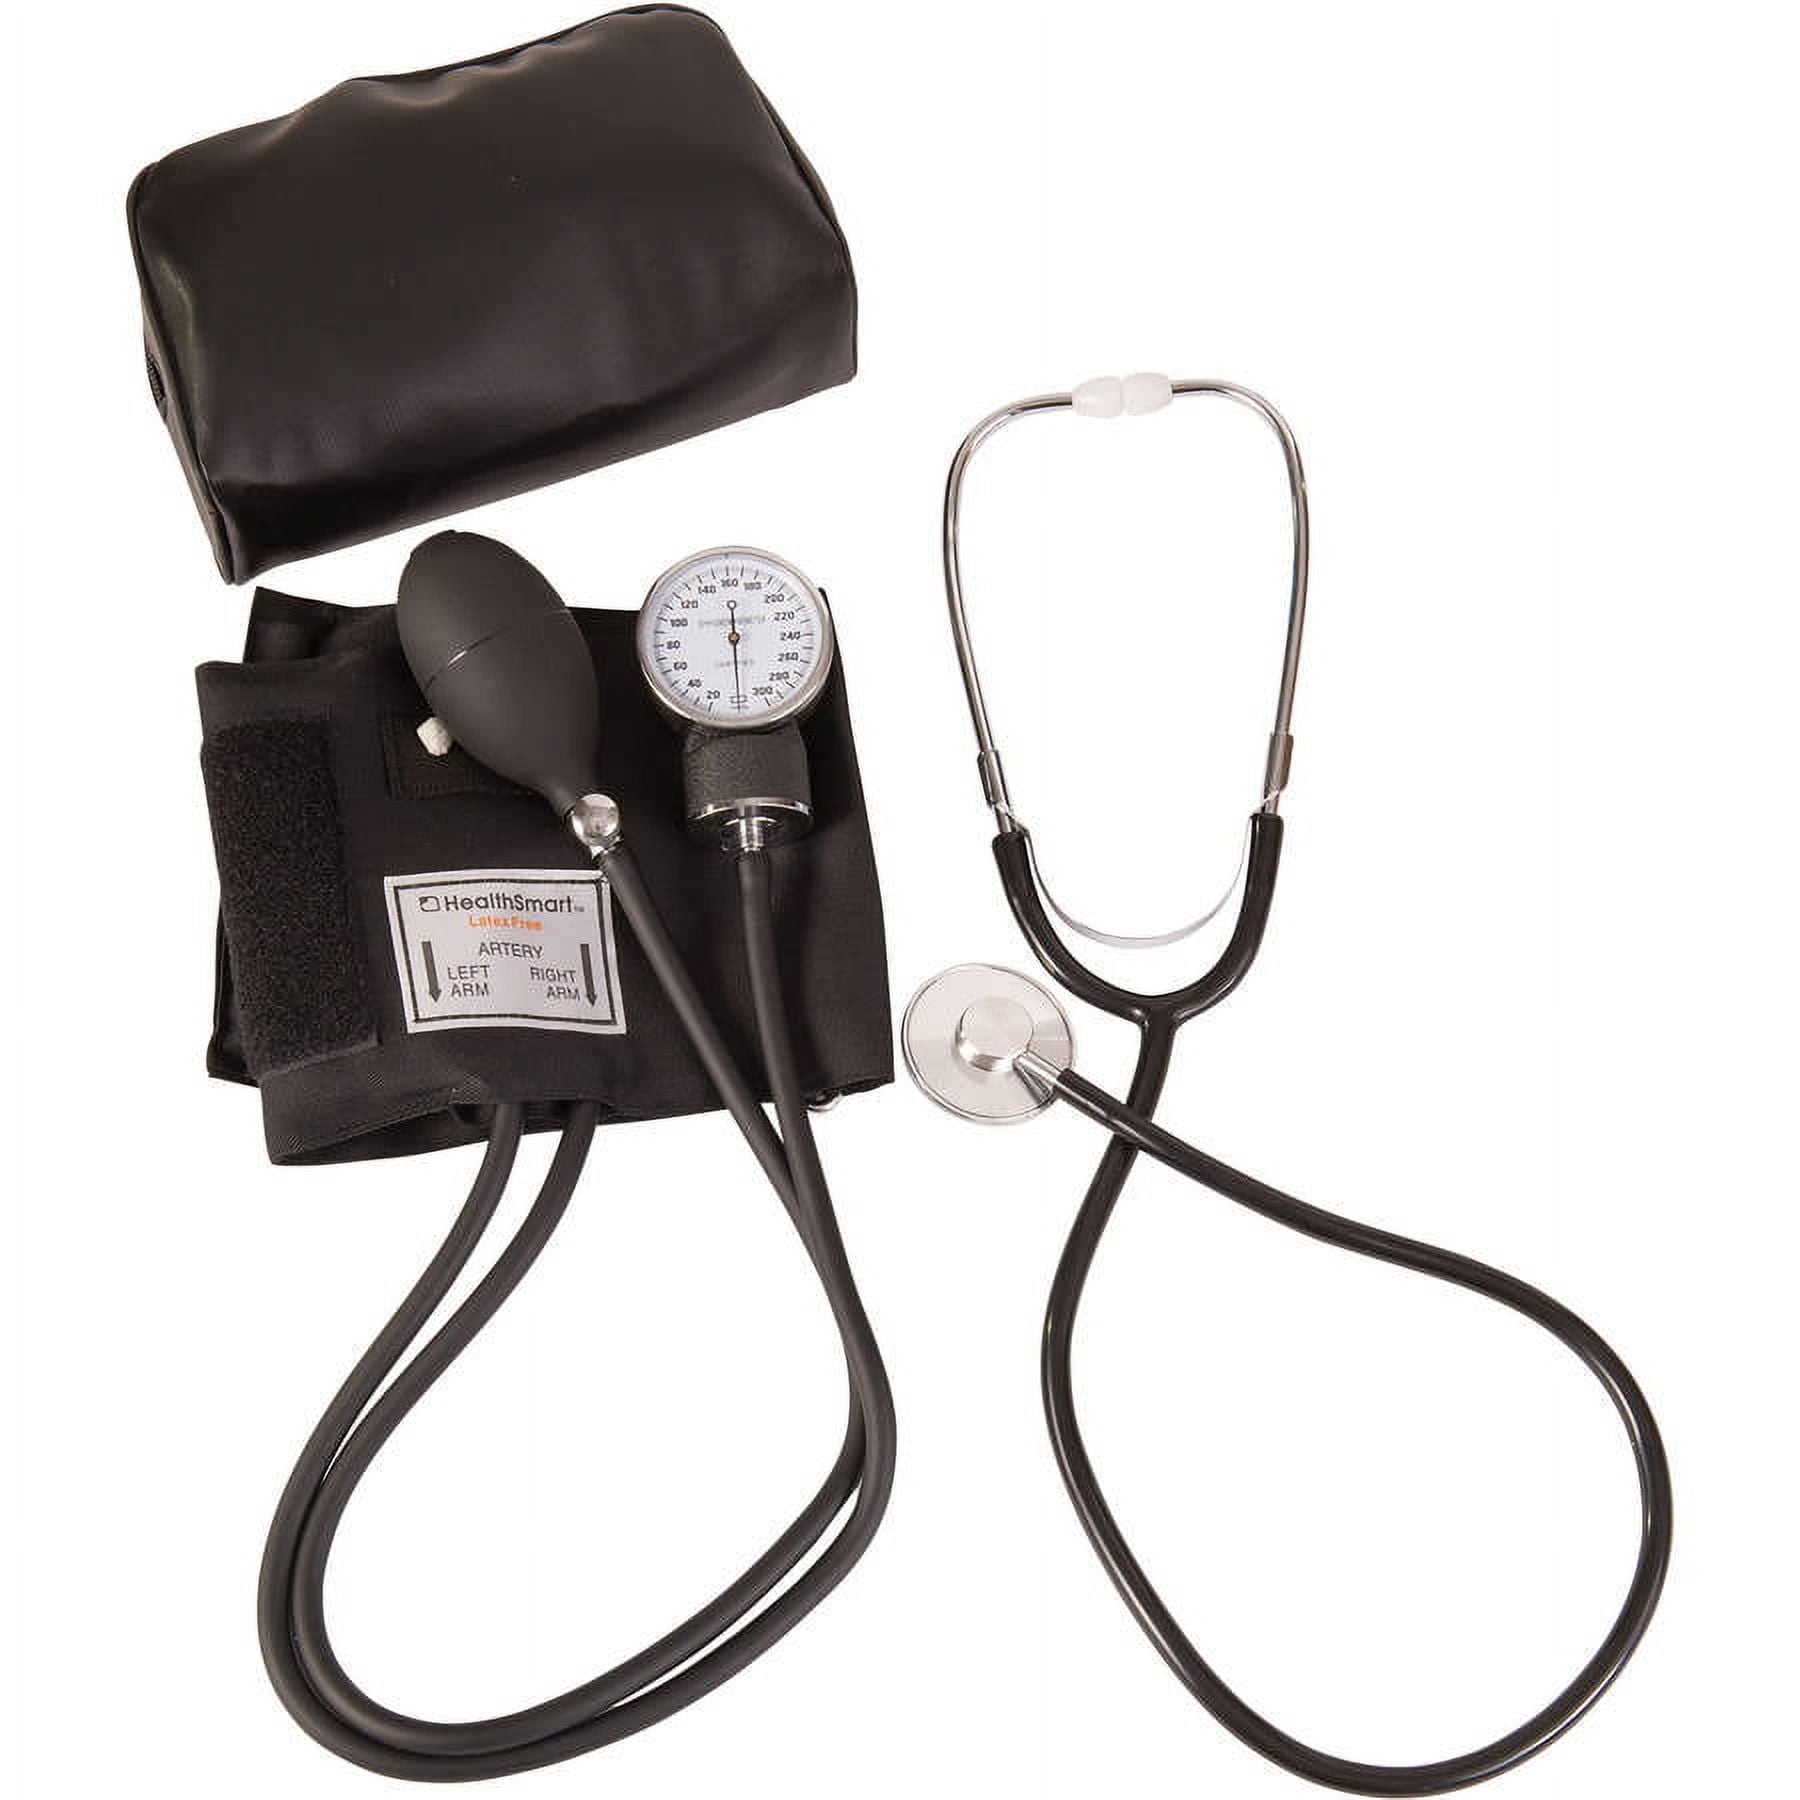  HCS Manual Extra Large Blood Pressure Cuff - Aneroid  Sphygmomanometer, X Large Adult - Medical, in-Home, Elderly Care - Arm BP  Cuff Manual - Monitor Blood Pressure Cuff Manual - Carrying